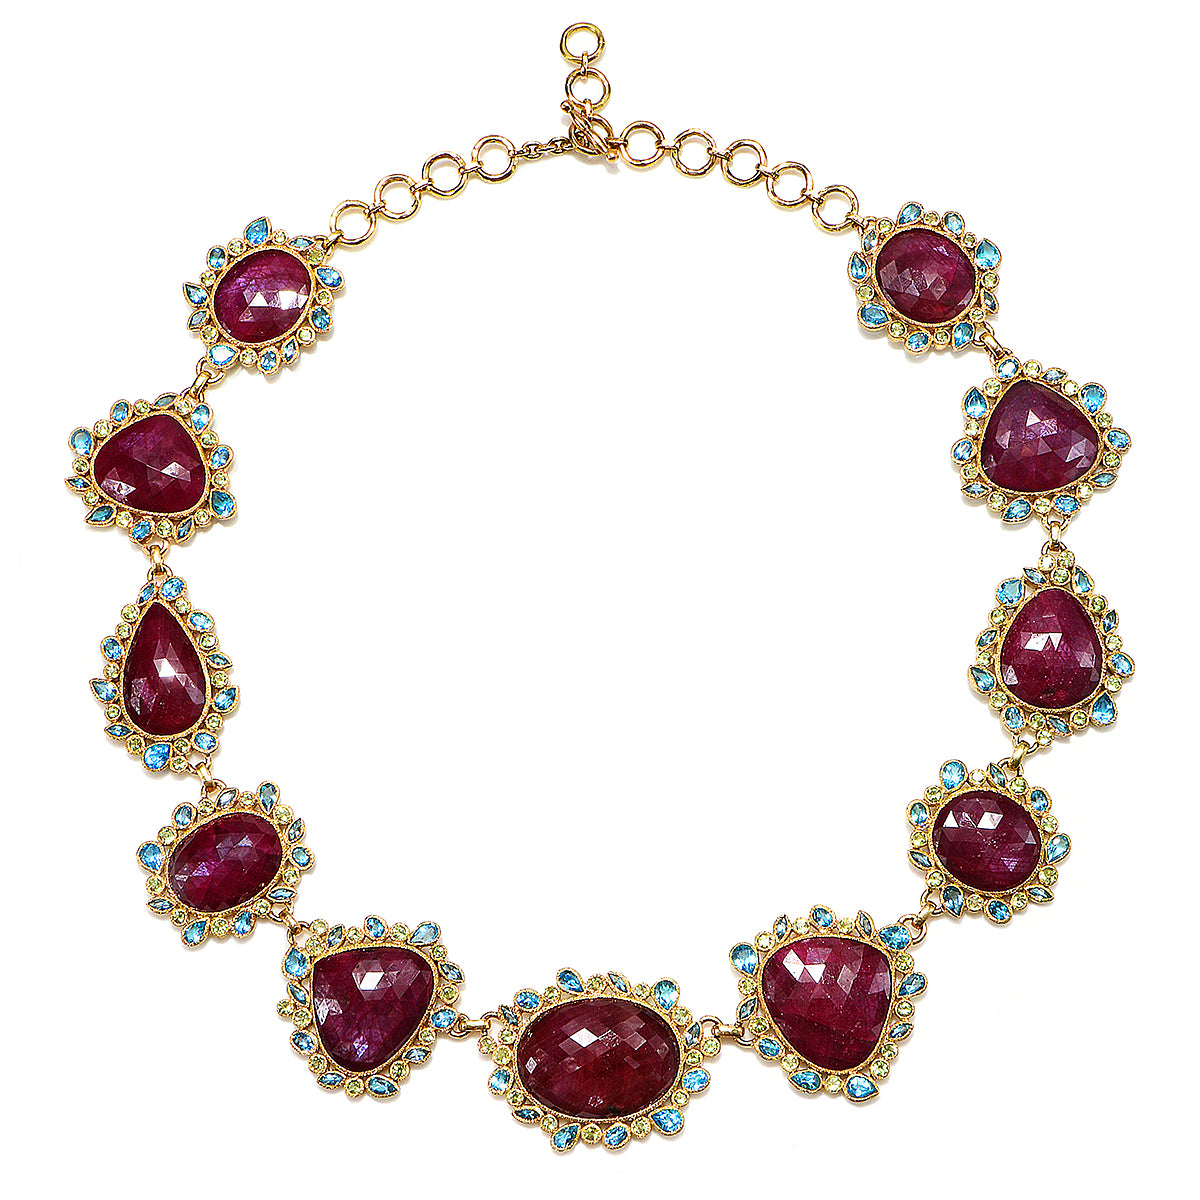 Circle of Fire - 14k Gold and Ruby Necklace with Blue Topaz